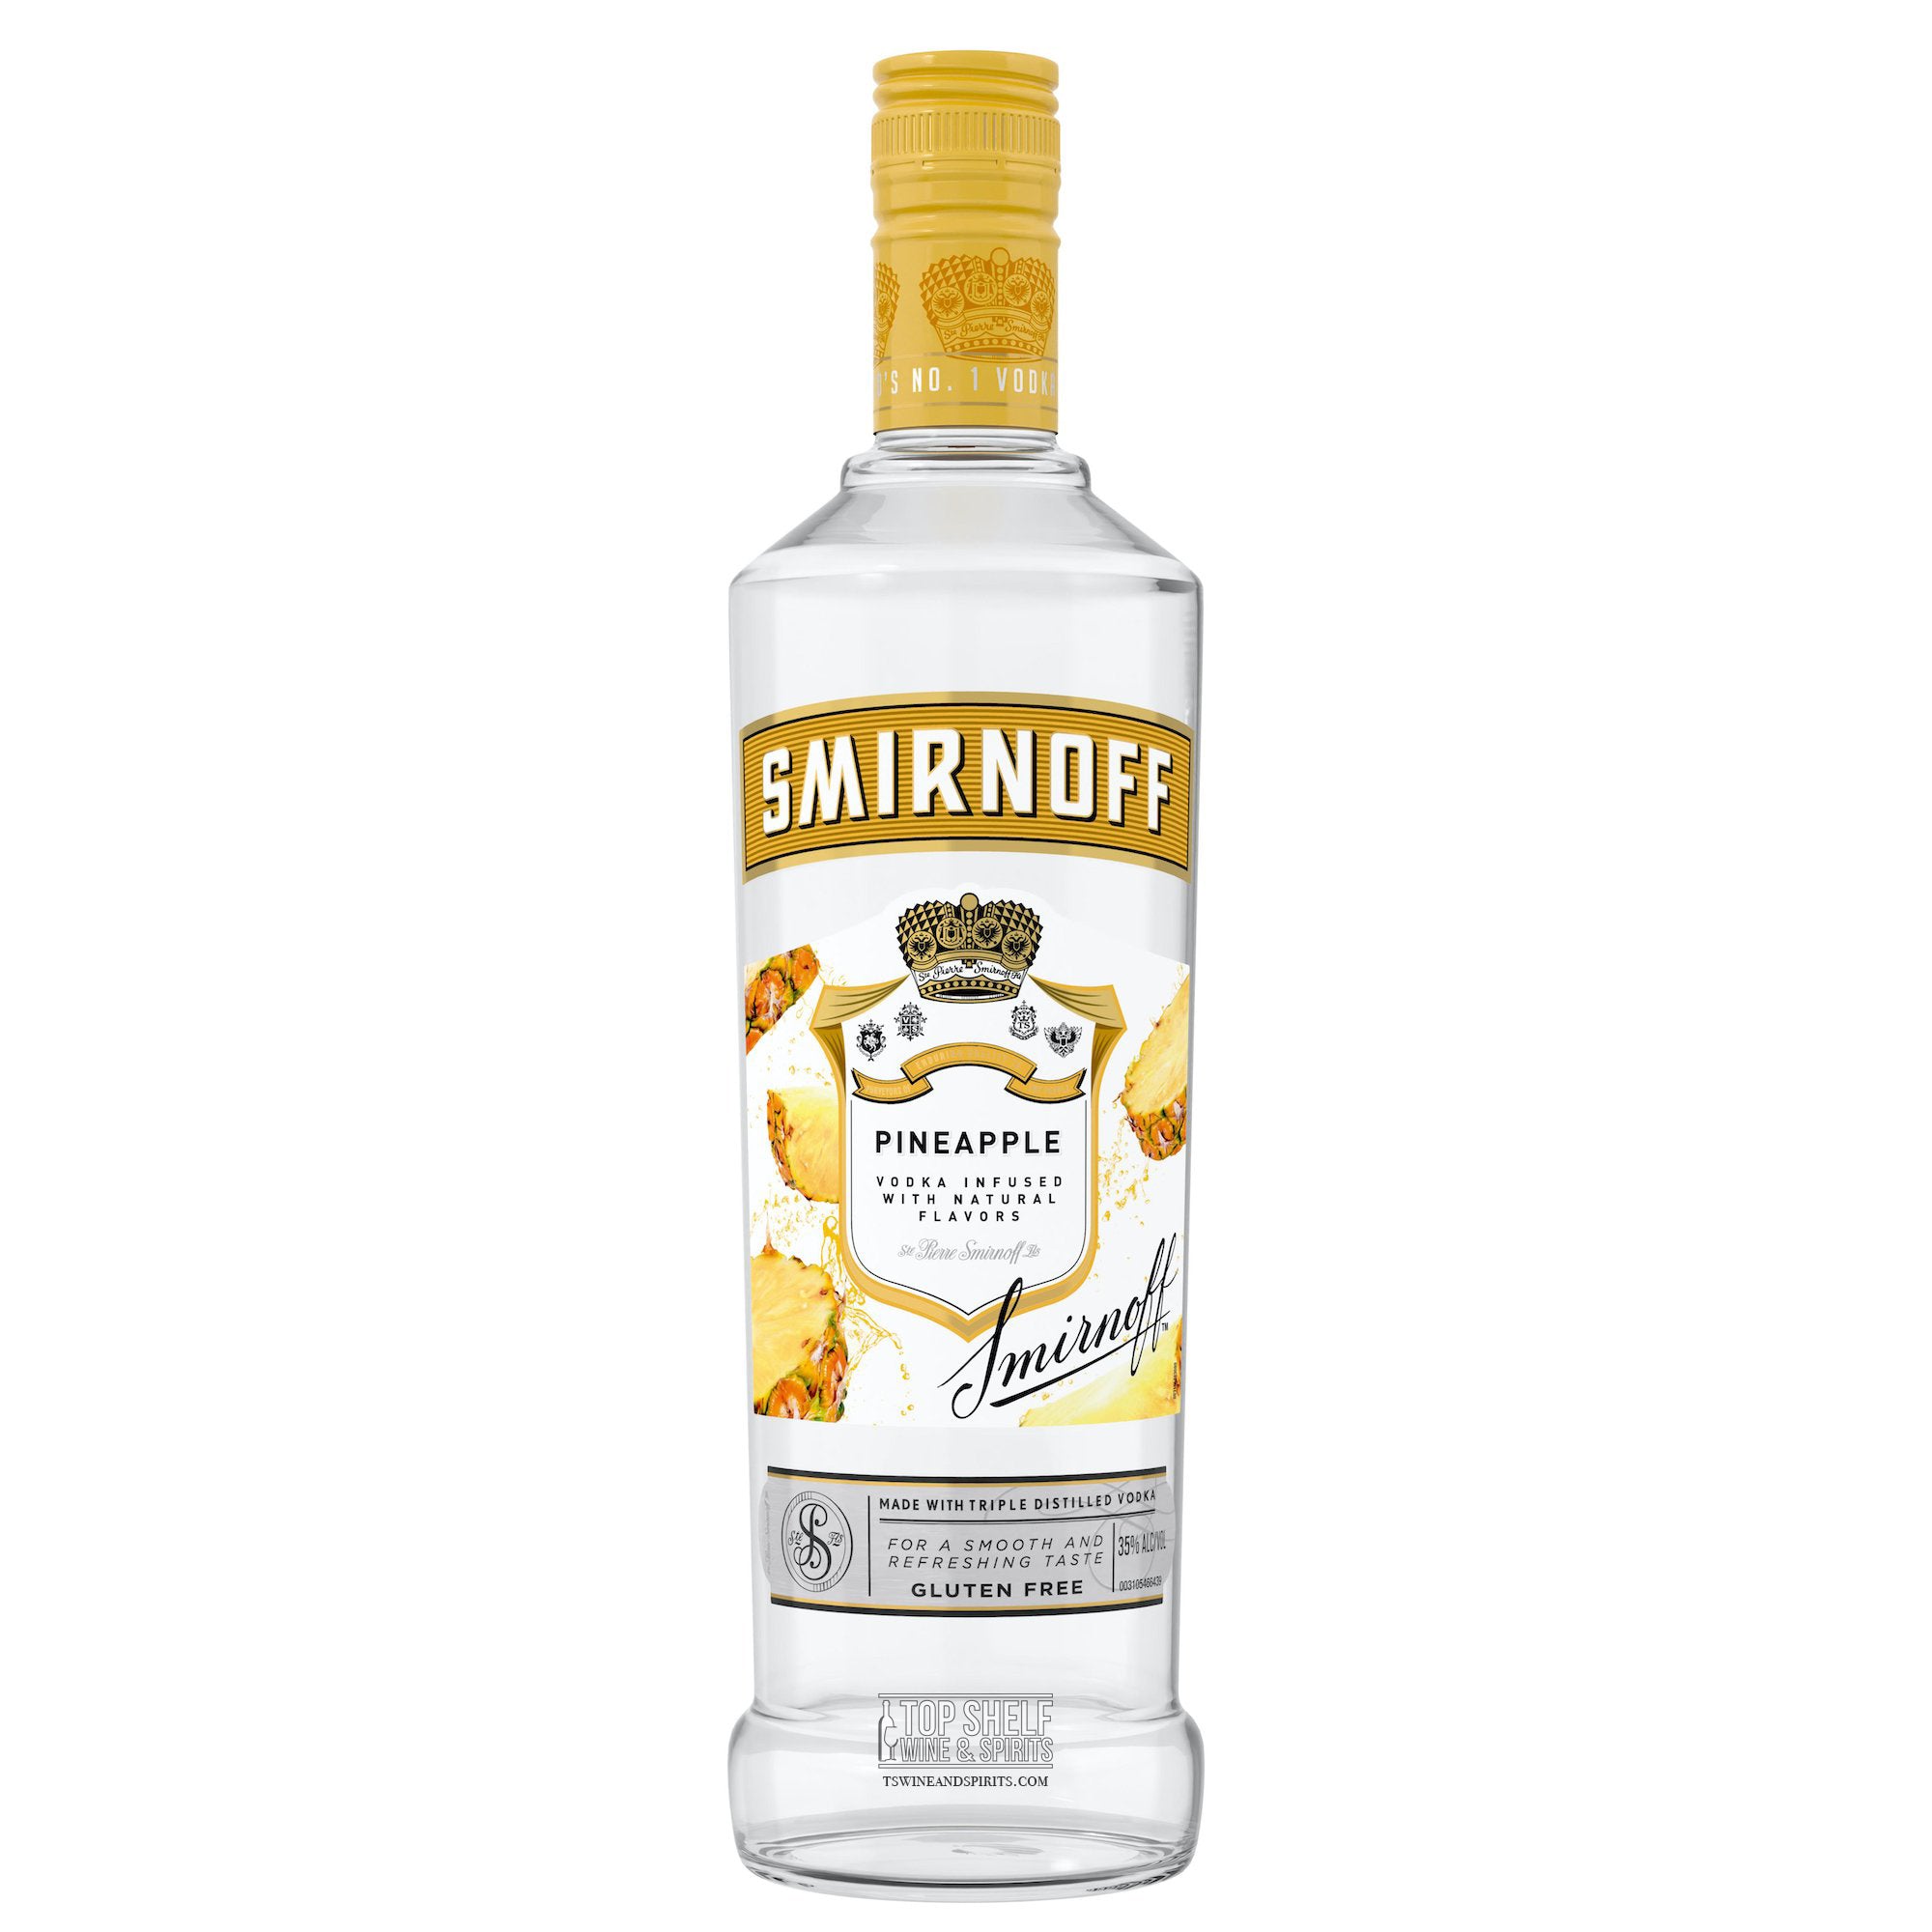 CIROC PINEAPPLE VODKA 200 ML - Old Town Tequila